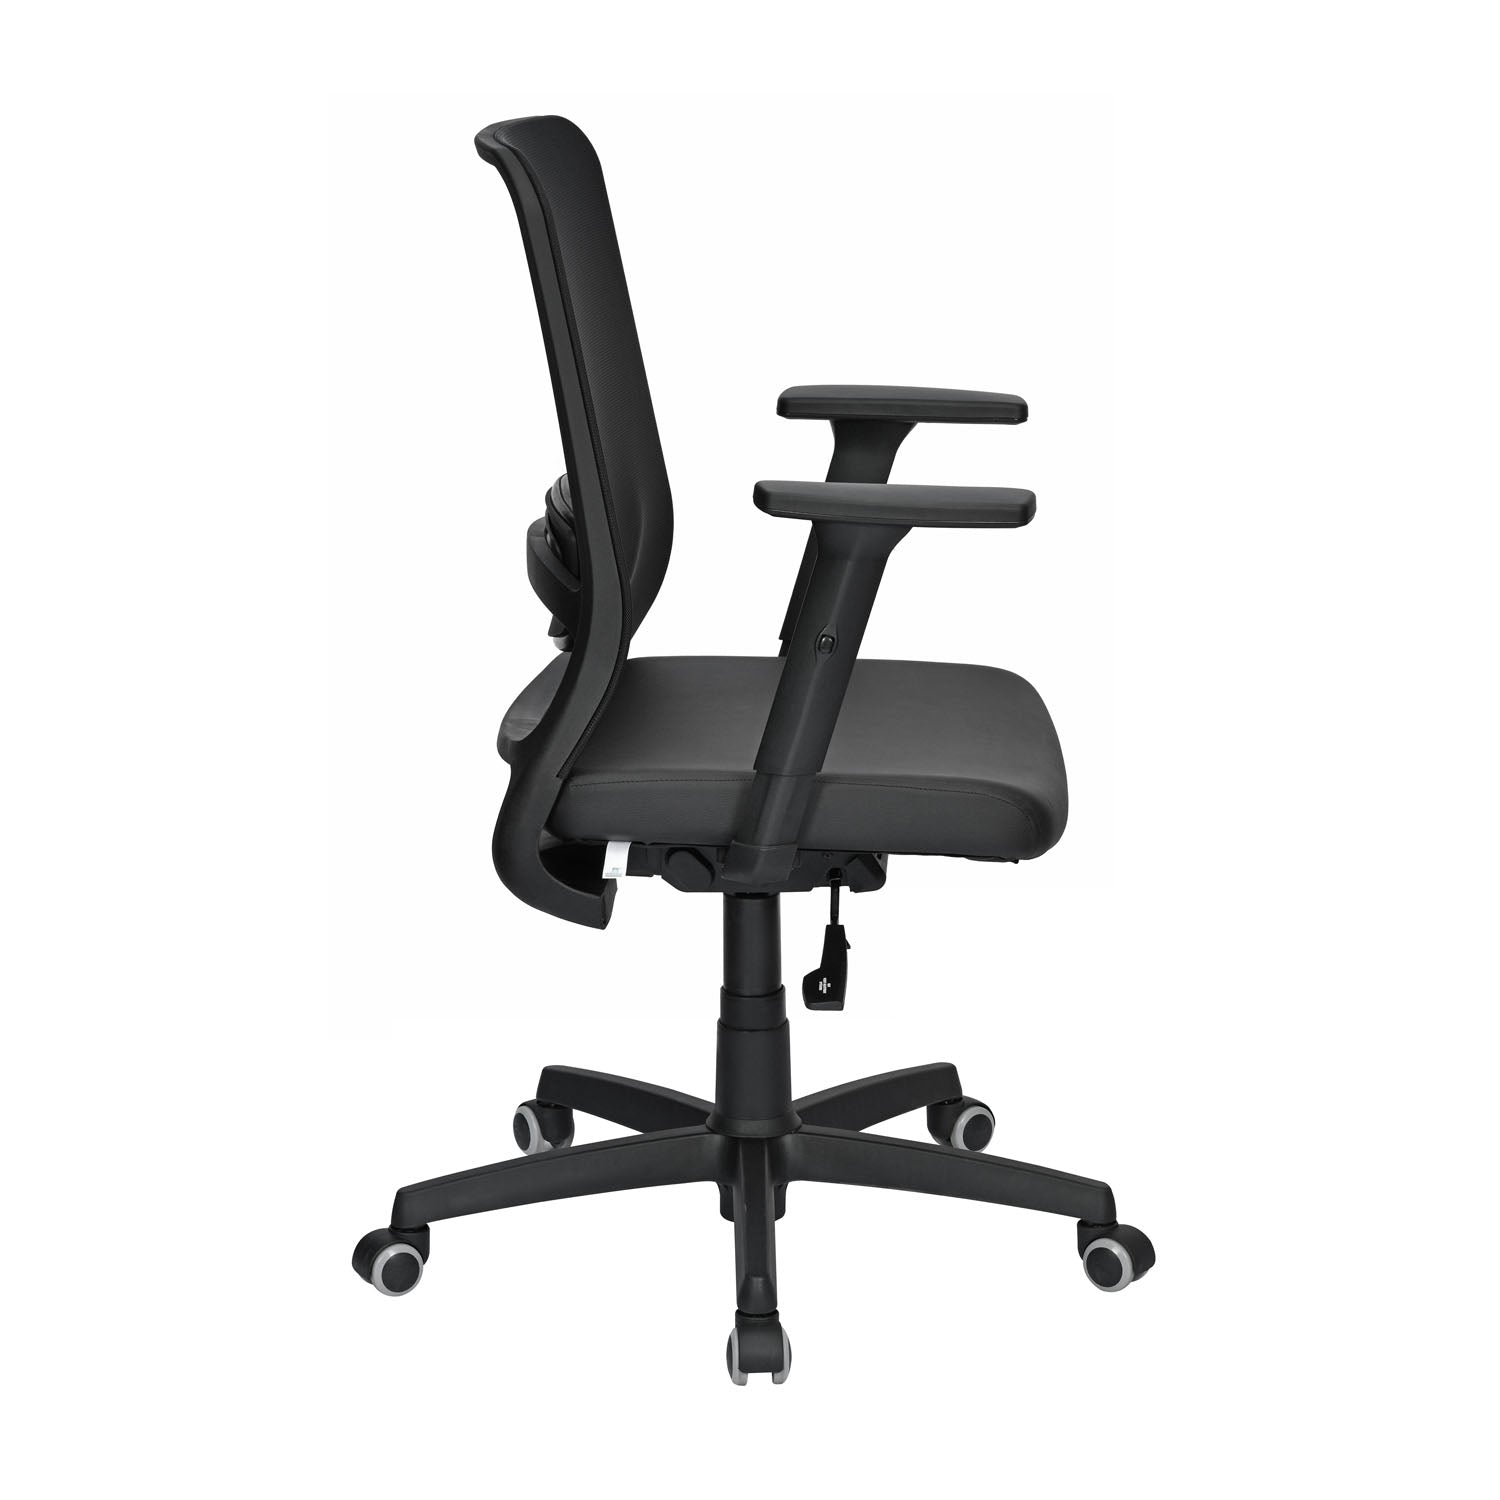 Glory Mid Back Office Chair (Black)